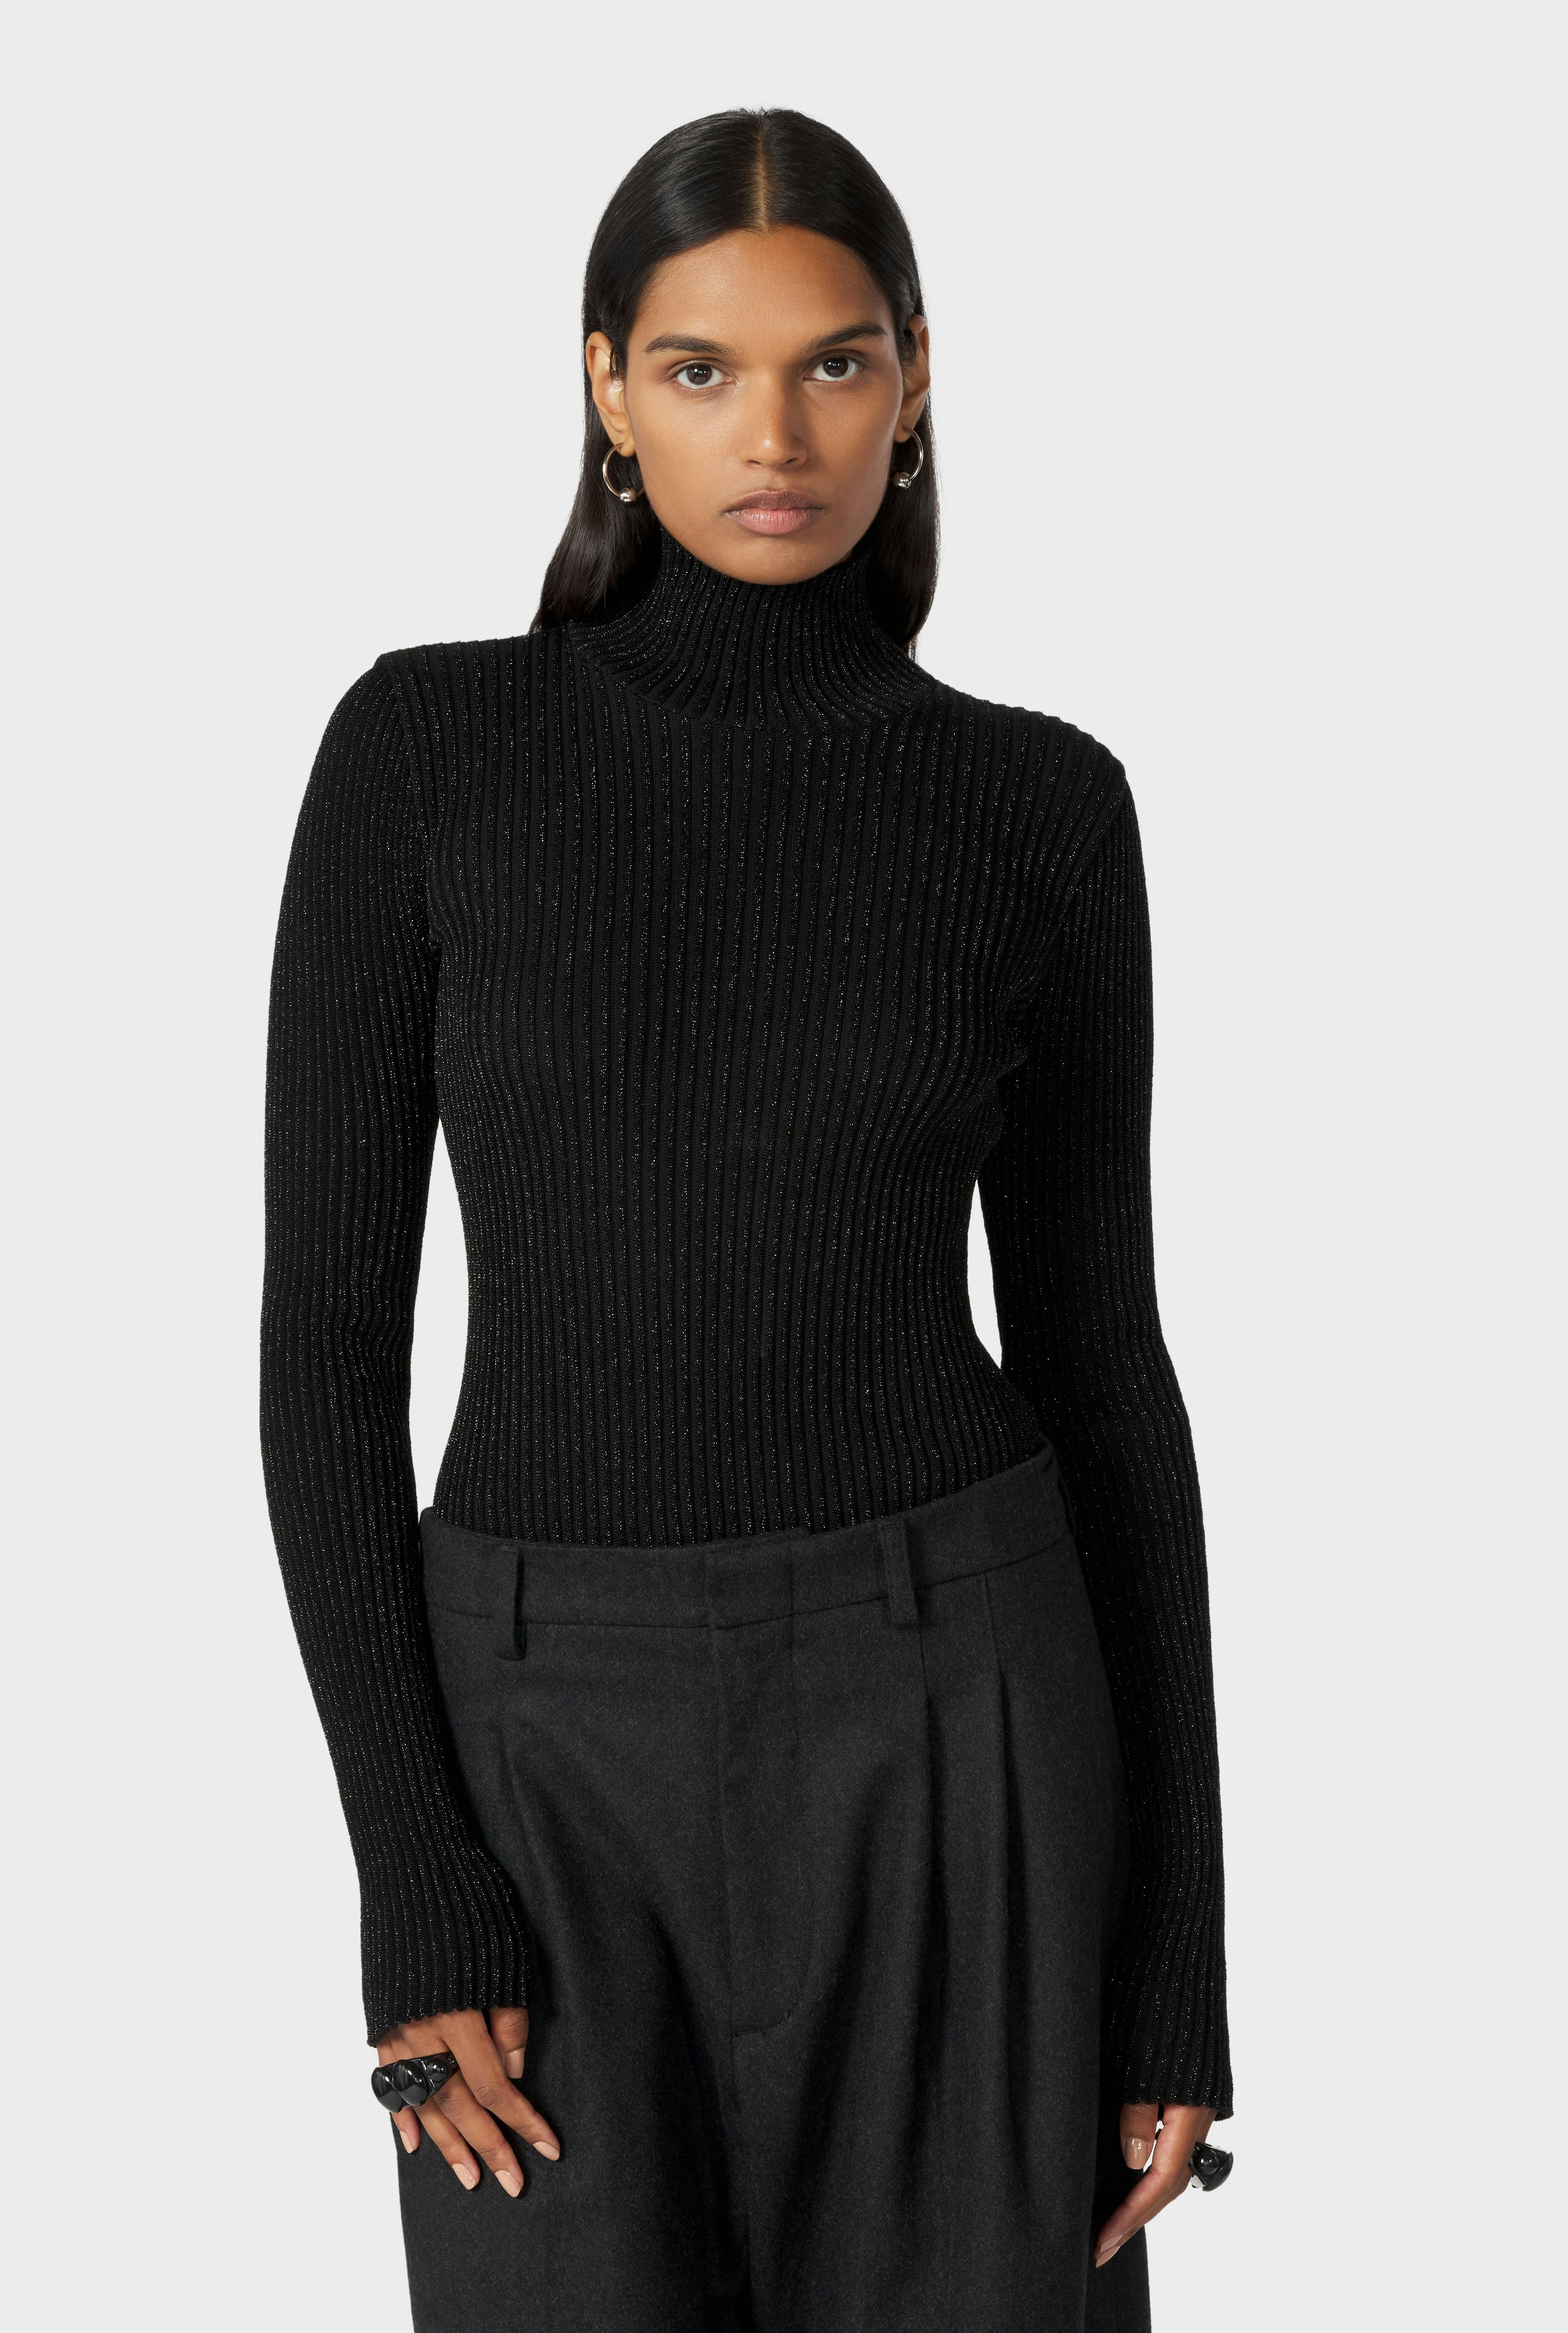 The Black Cyber Knit Top